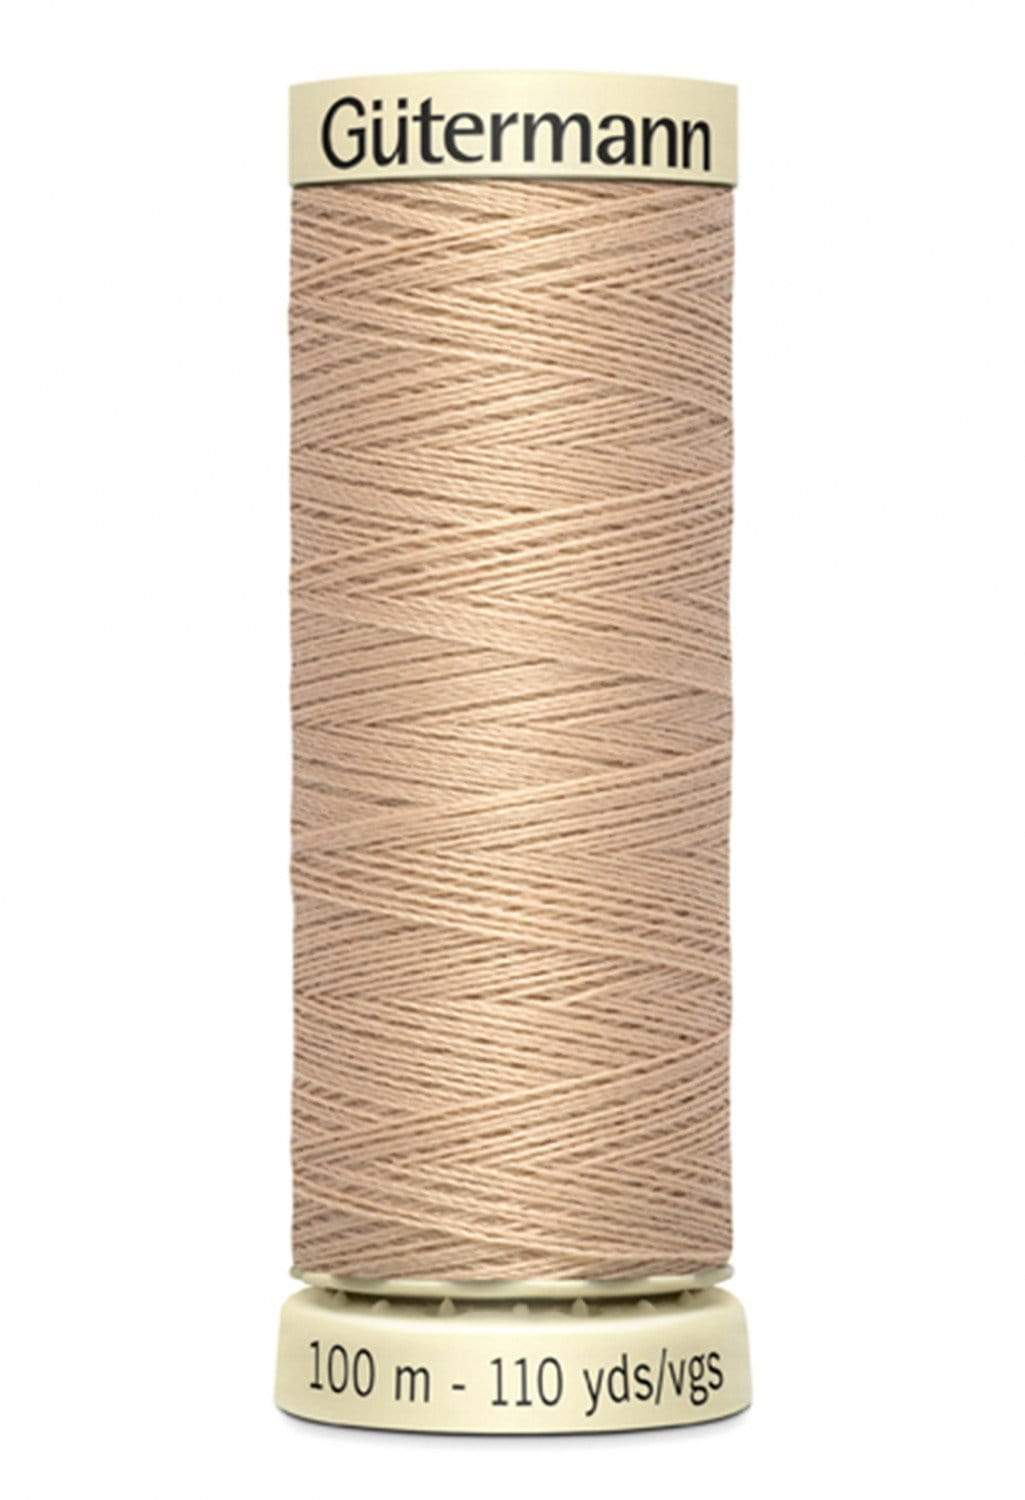 503 Flax ~ Sew-All Gutermann Polyester Thread ~ 100 Meters